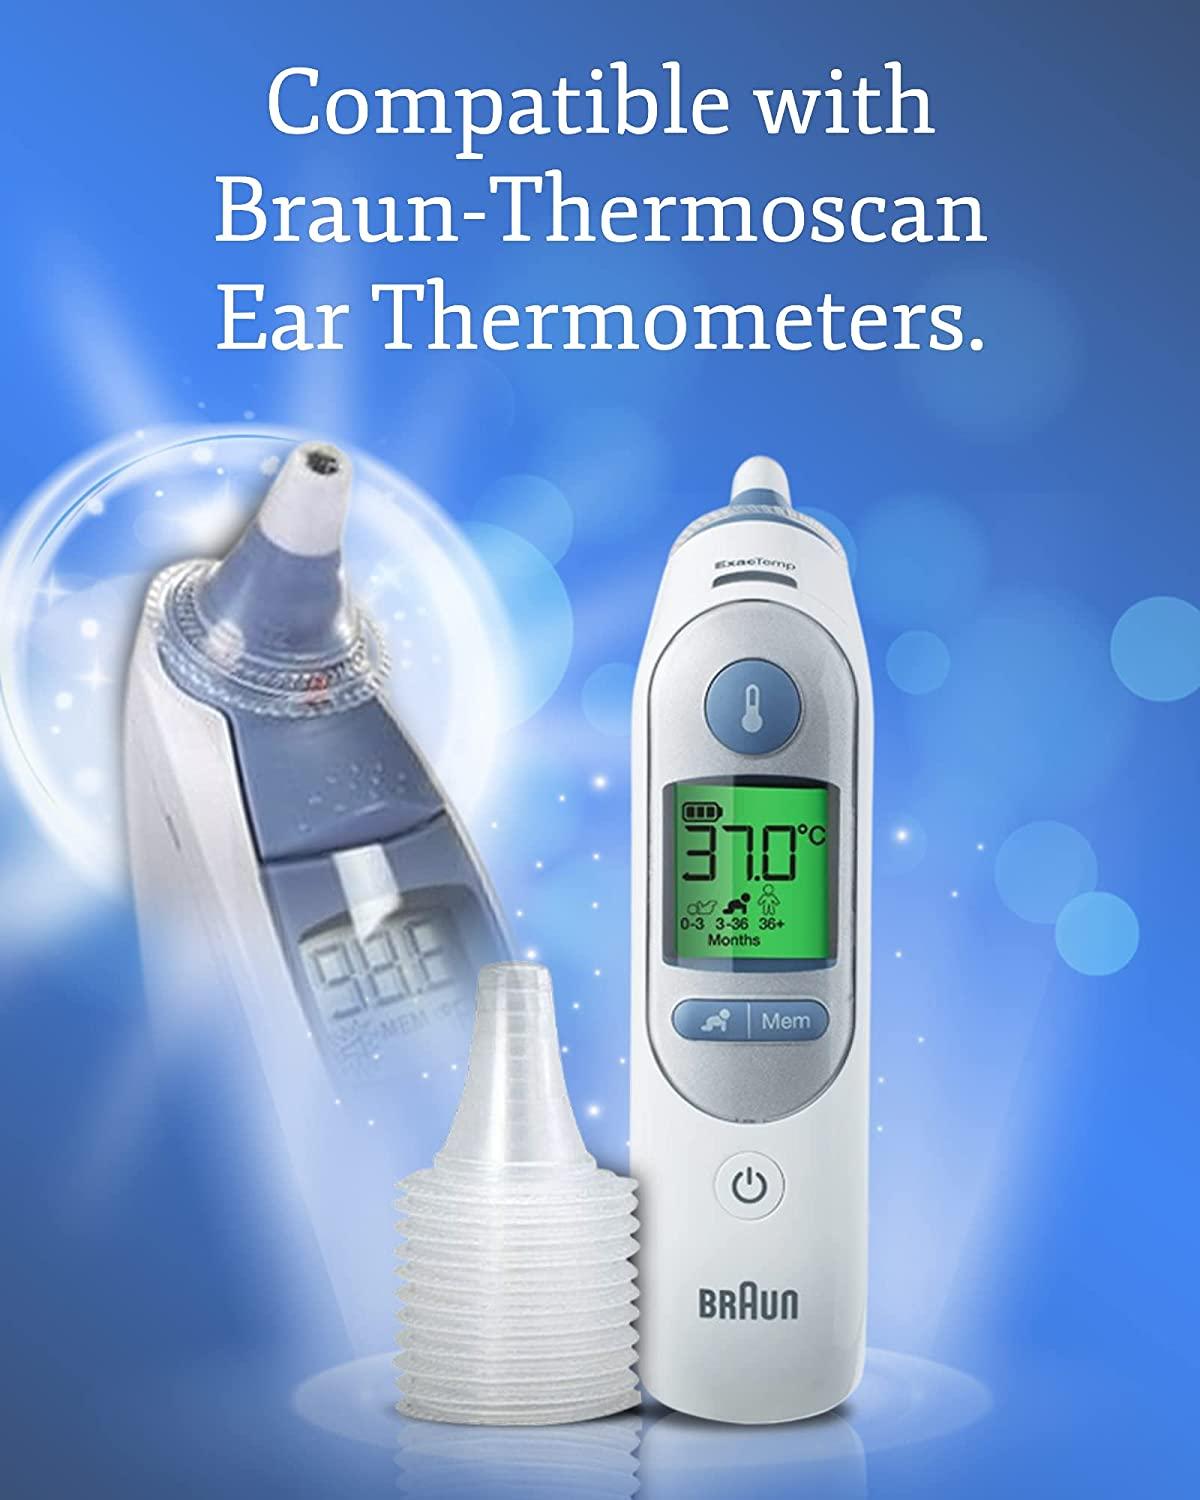 Braun ThermoScan 7 IRT 6520 Review, Personal thermometer